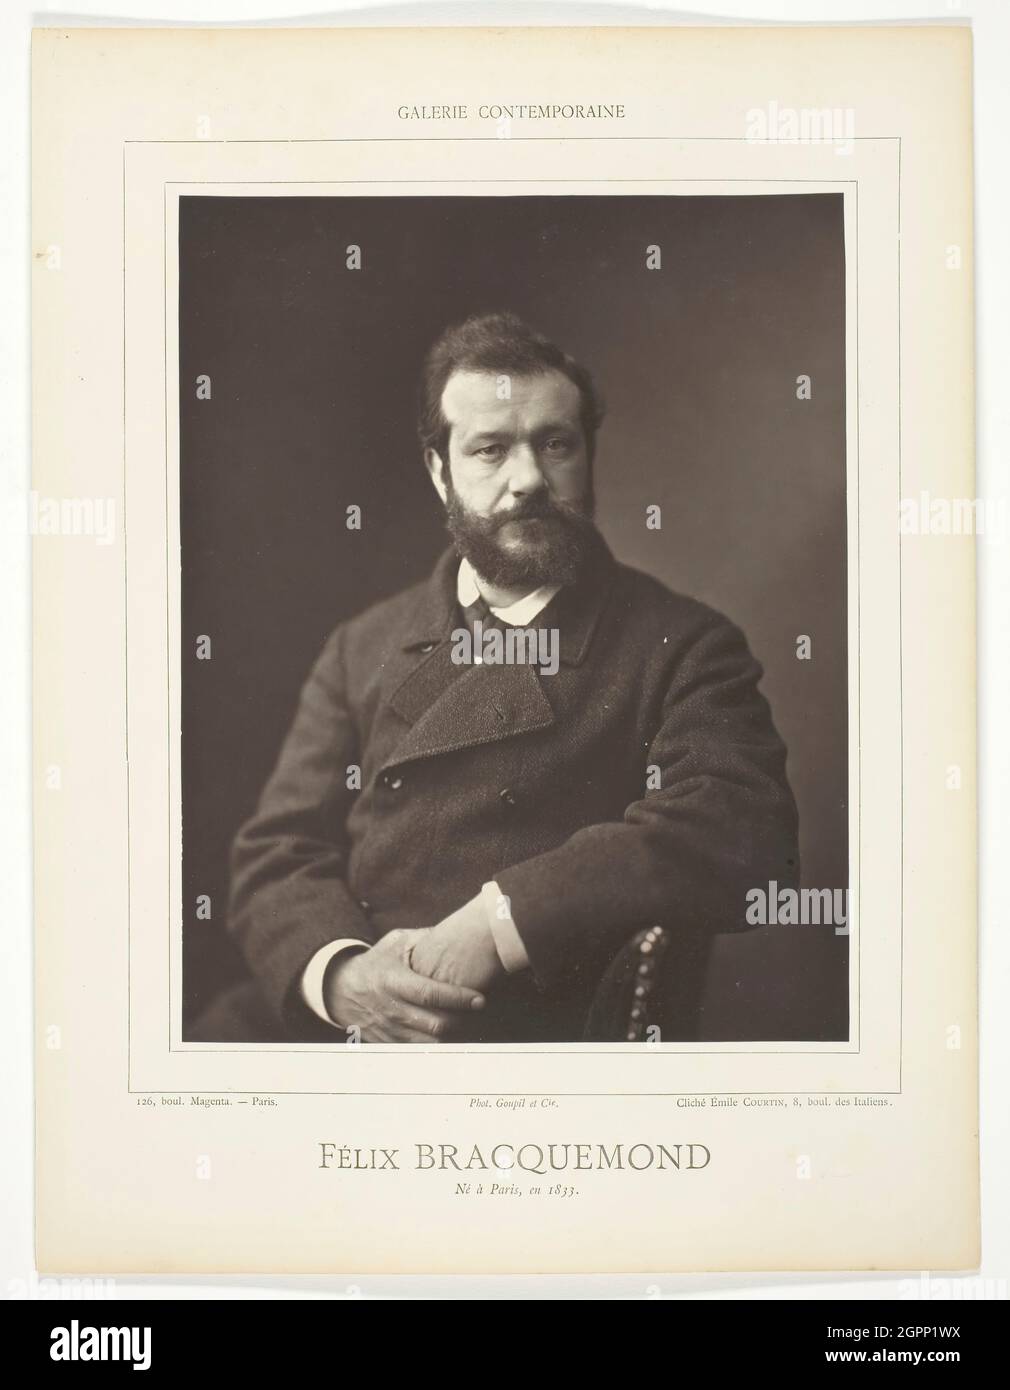 F&#xe9;lix Henri Bracquemond (French painter and printmaker, 1833-1914), 1875/78. Woodburytype, from the periodical &quot;Galerie Contemporaine Litt&#xe9;raire, Artistique&quot; (1878), volume 5. Stock Photo